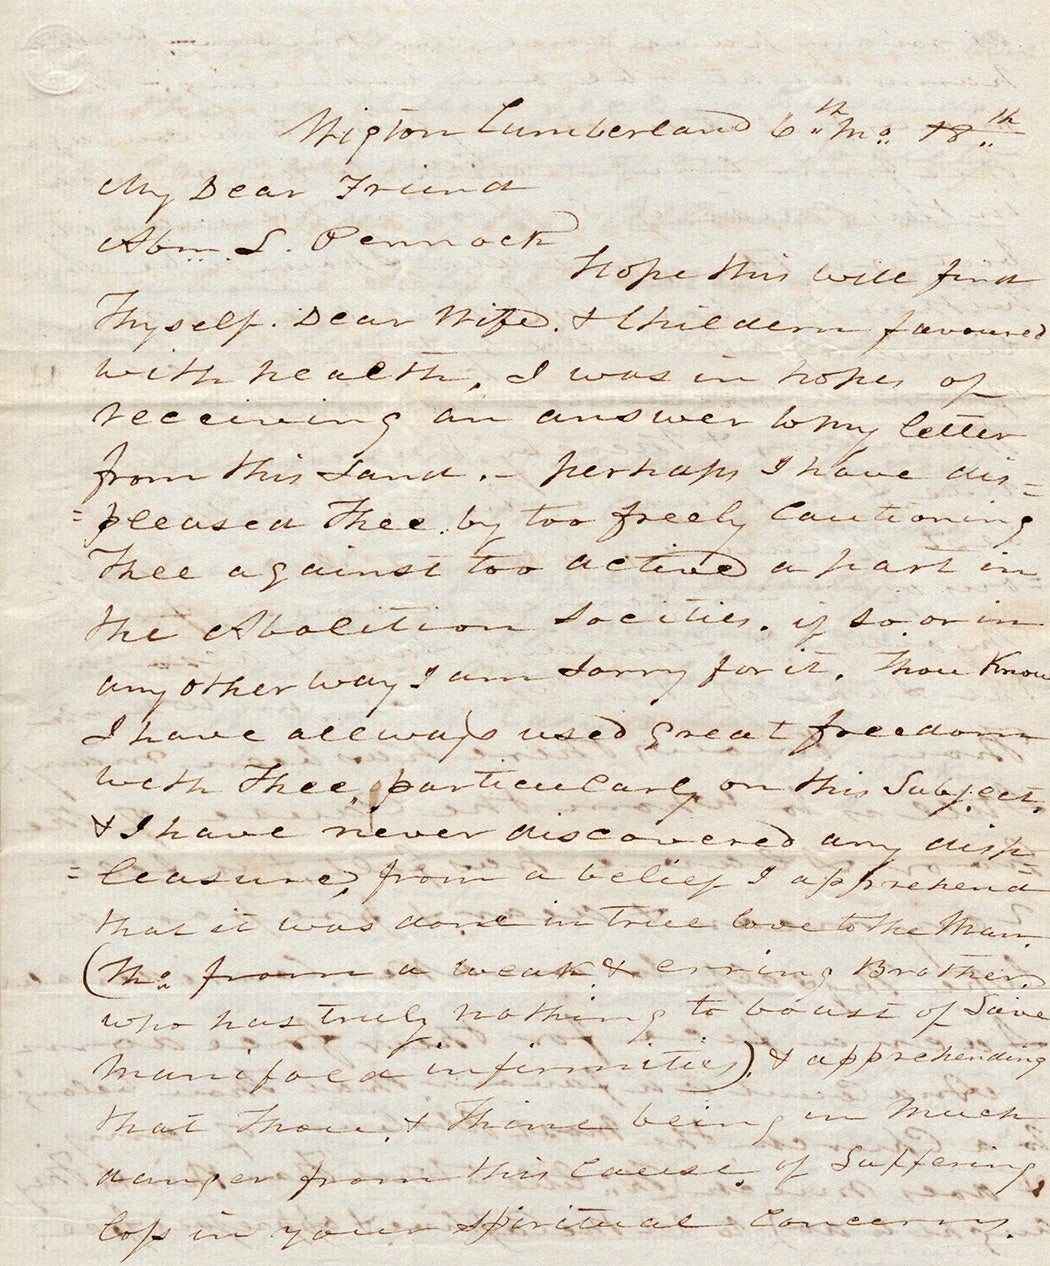 Letter to Quaker abolitionist Abraham L. Pennock in Haverford, Pennsylvania from a fellow Quaker in England cautioning him about activism with Abolitionist societies in America.